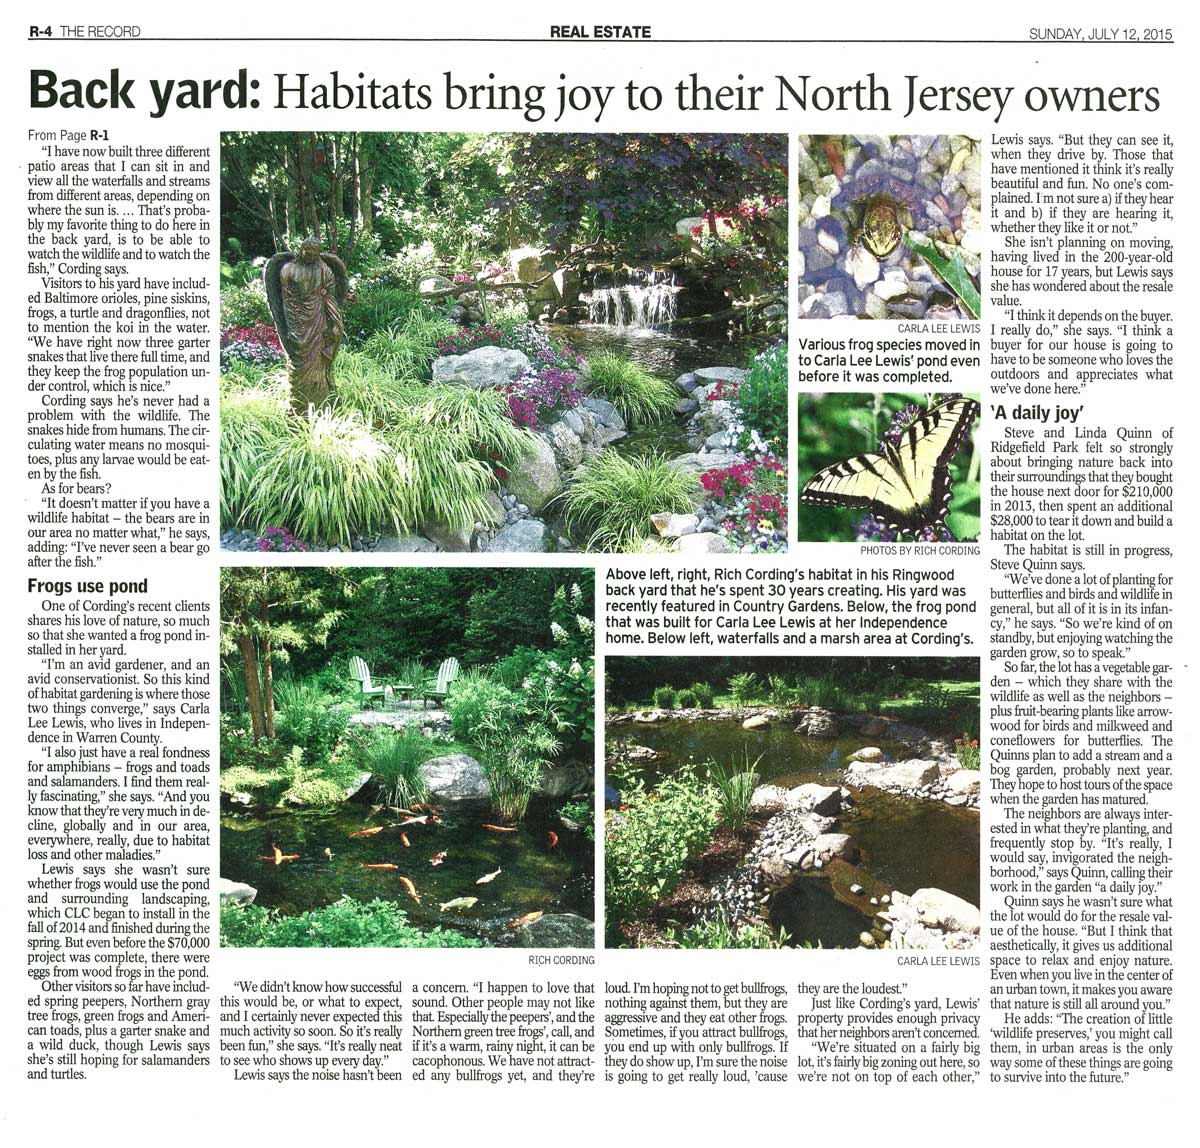 Article in The Record about Backyard Habitats - Page 2